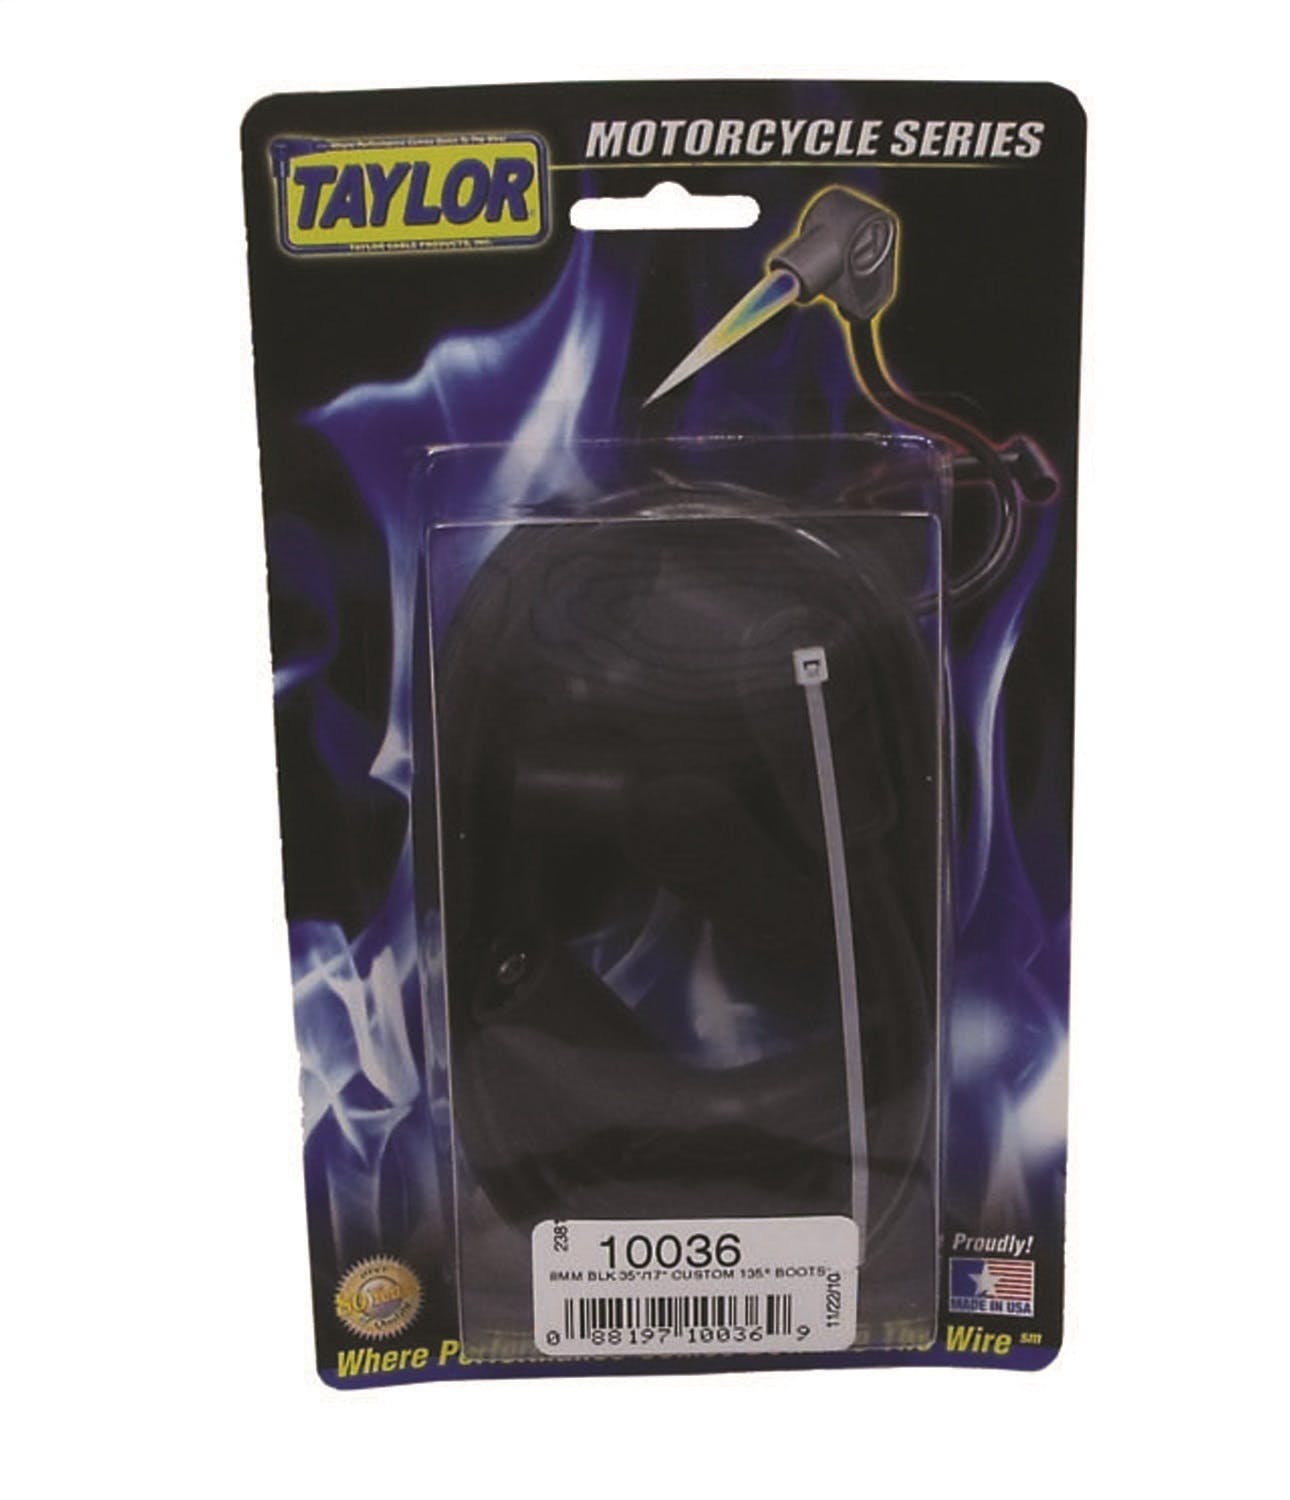 Taylor Cable Products 10036 8mm Spiro-Pro black 35/17in custom MC 135